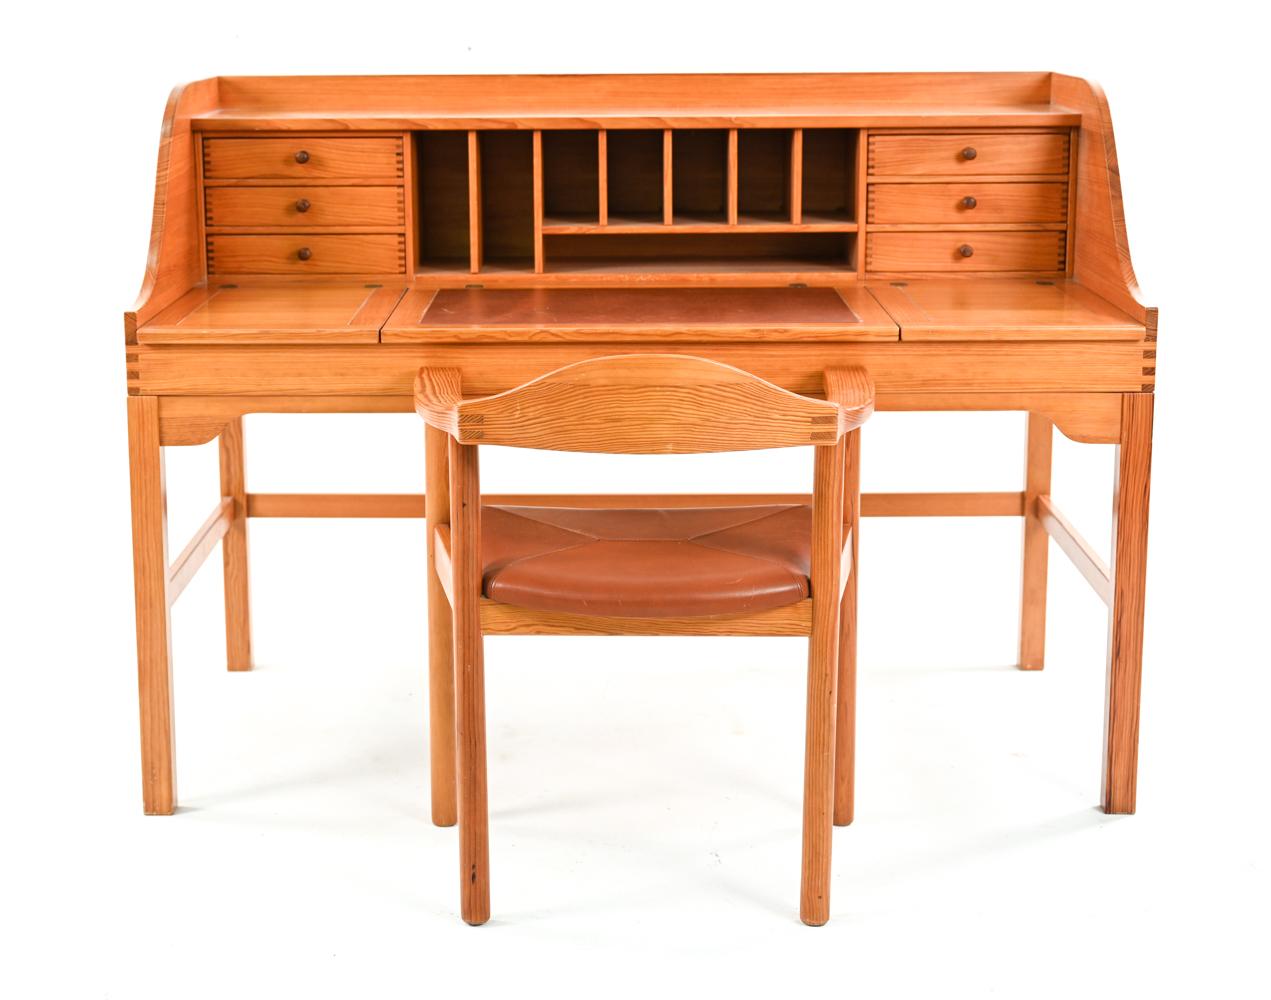 A Mid-Century Modern free-standing desk made of pine, designed by Andreas Hansen. Featuring top with three flip up leaves, under which storage compartments, middle section with brick-red leather writing blot, six drawers and compartments, finished